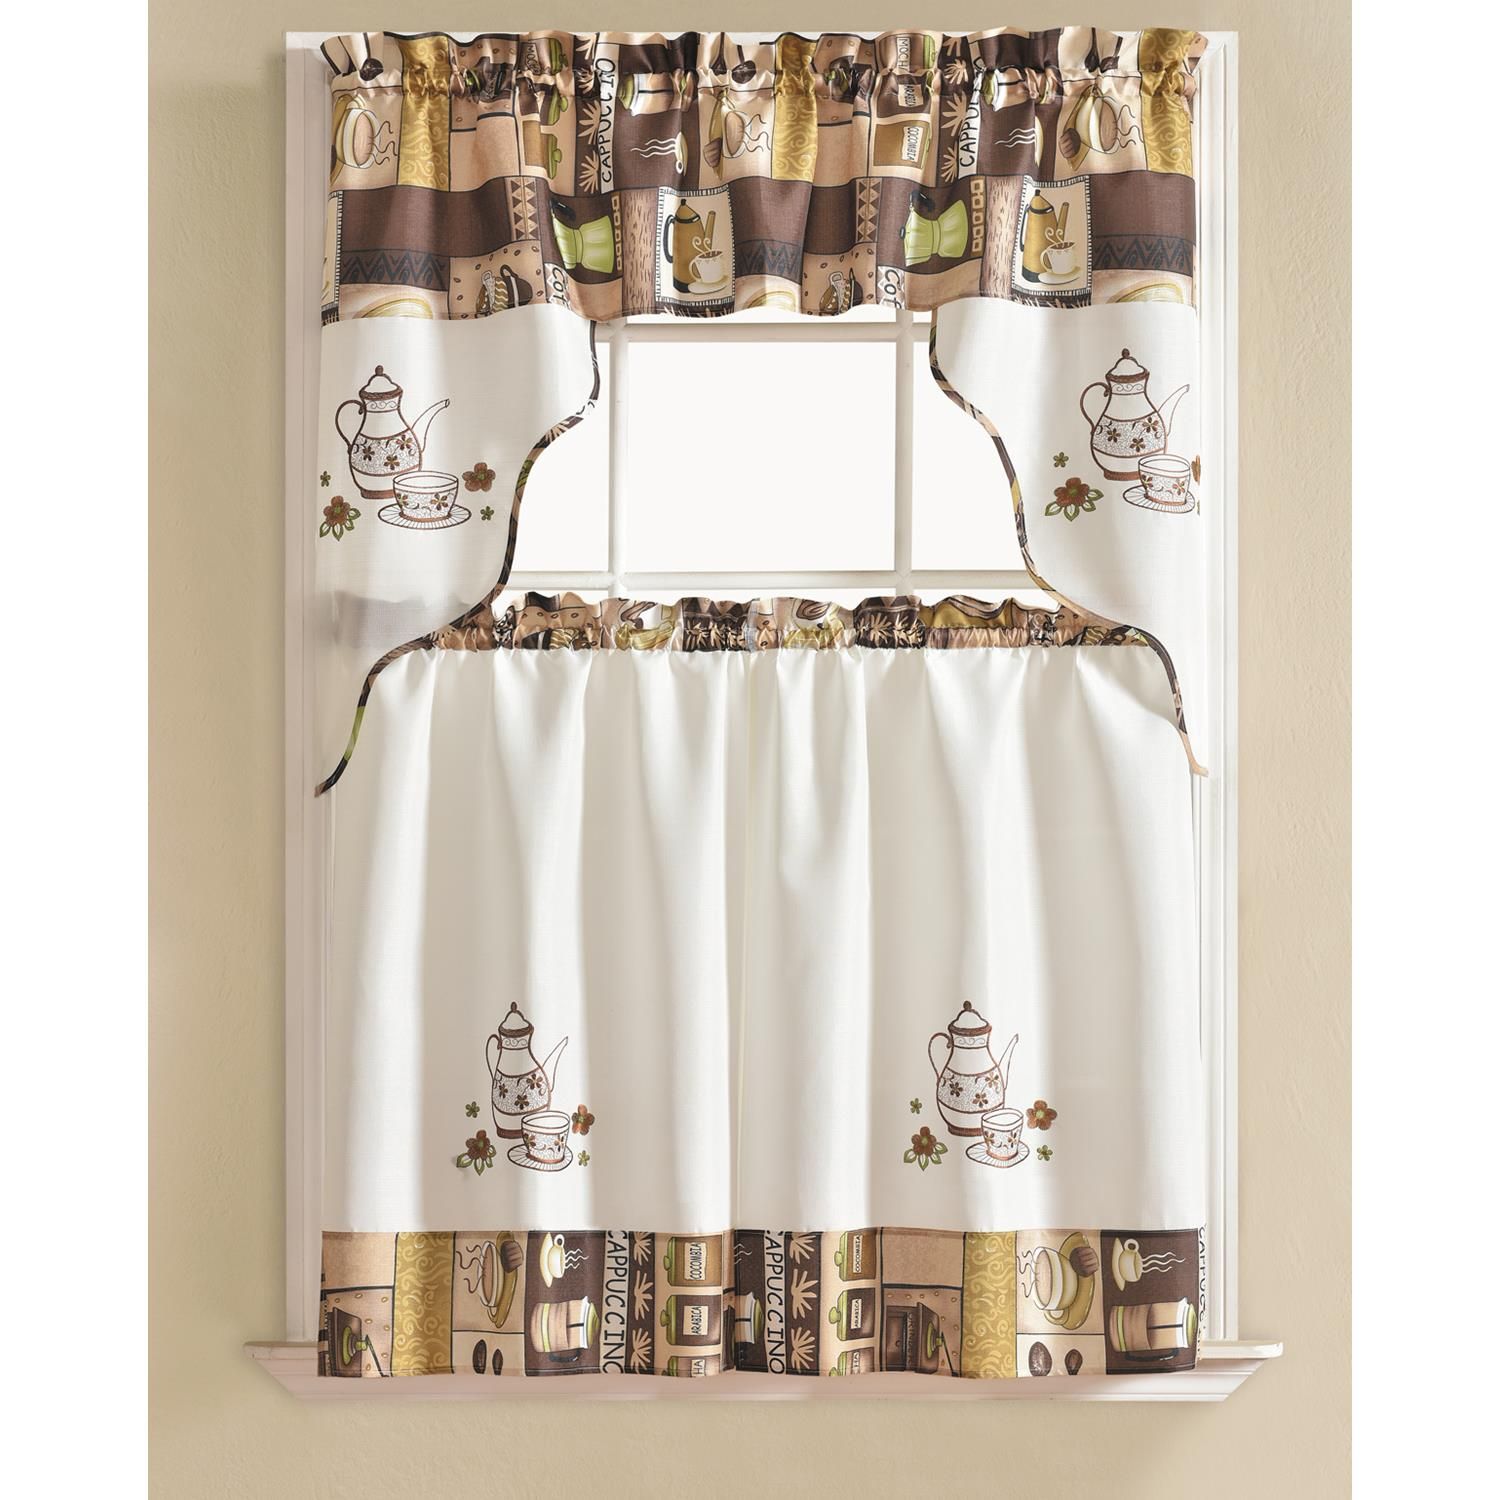 Details About Urban Embroidered Coffee Tier And Valance Kitchen Curtain Set Regarding Urban Embroidered Tier And Valance Kitchen Curtain Tier Sets (Photo 2 of 20)